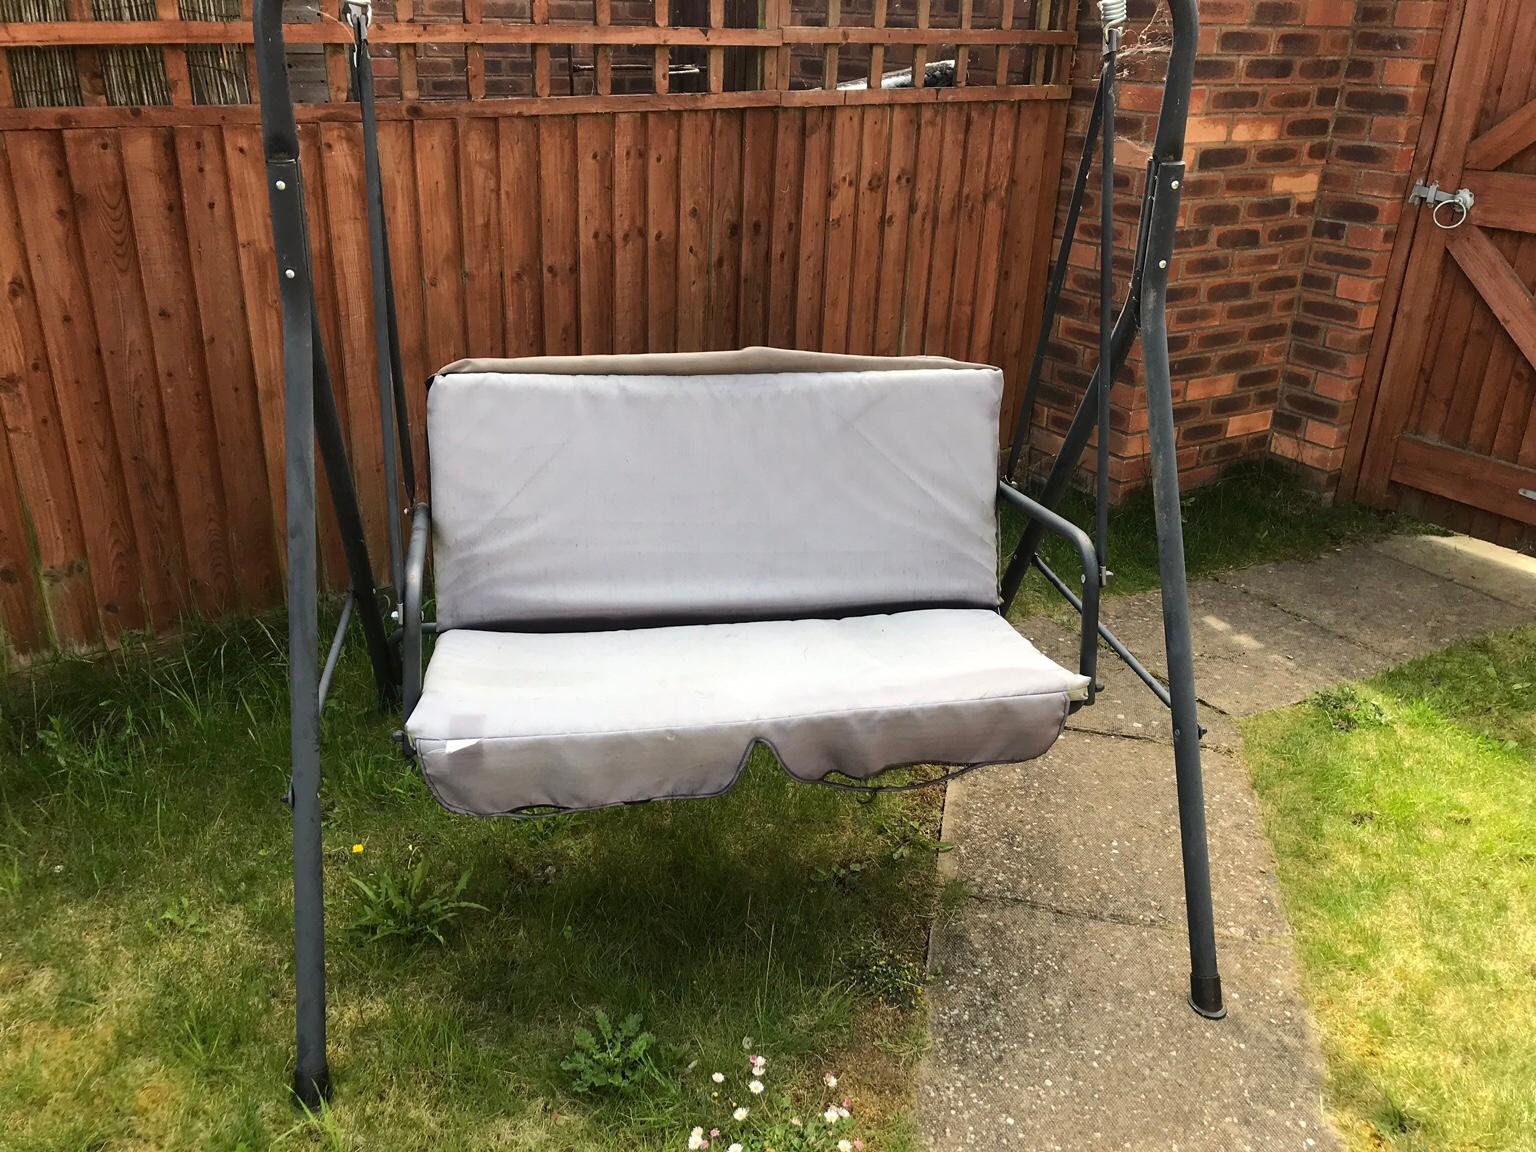 Garden Swing Seat In Pe7 Huntingdonshire For 10 00 For Sale Shpock